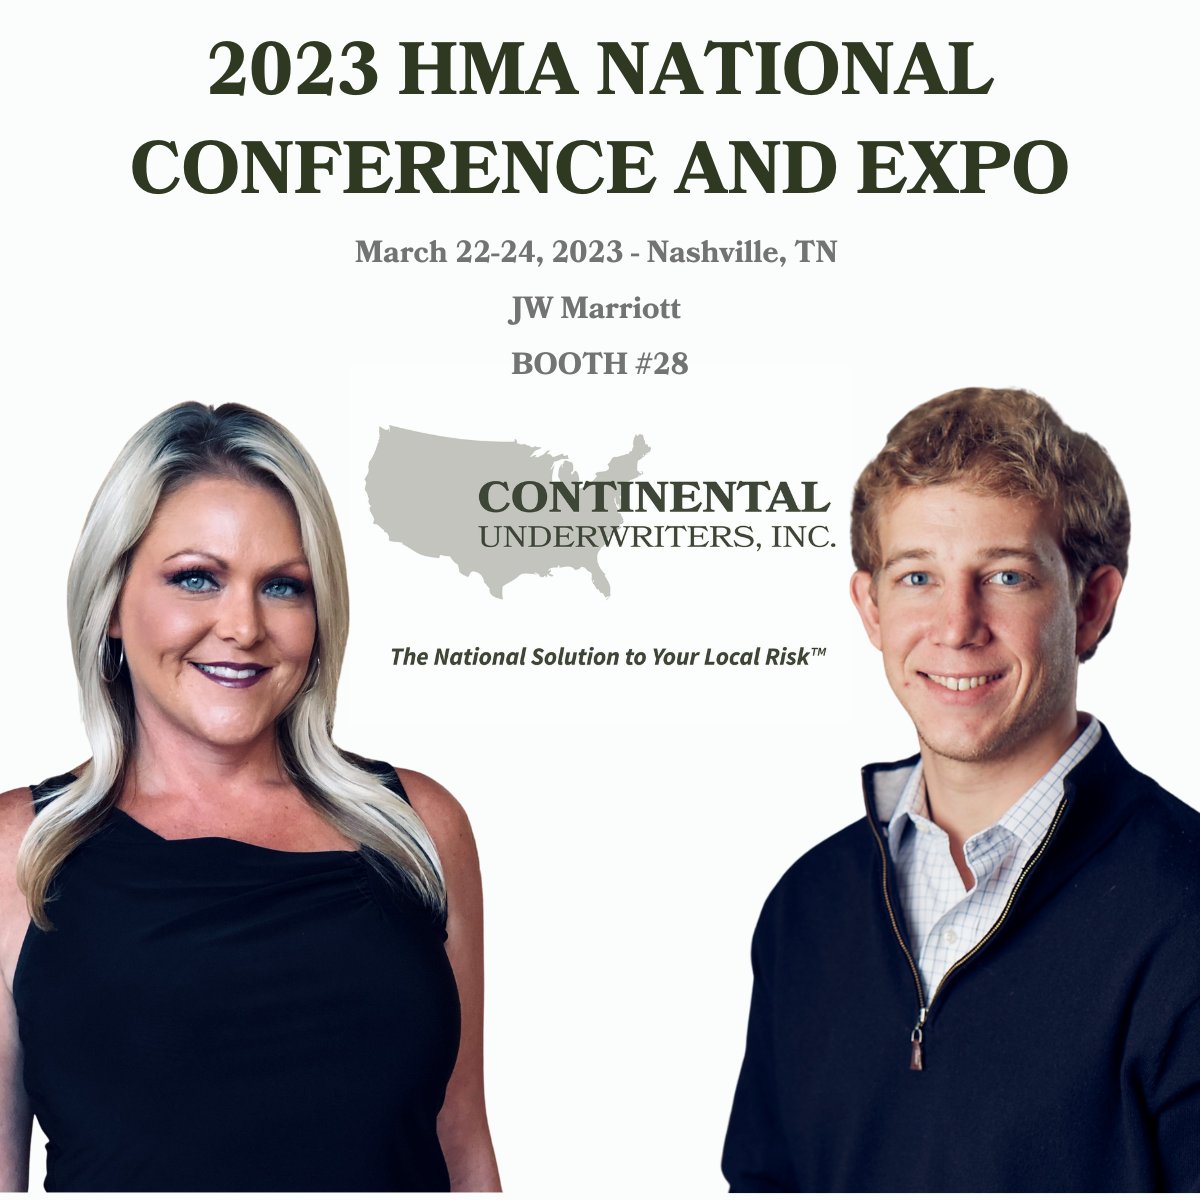 Next week @MelissaRBerry09  and Woody Stanchina are excited to meet everyone at the 2023 Hardwood Hardwood Manufacturers Association's National Conference and Expo in #Nashville! #Agentsofchange #forestproud #forestproducts #hardwood